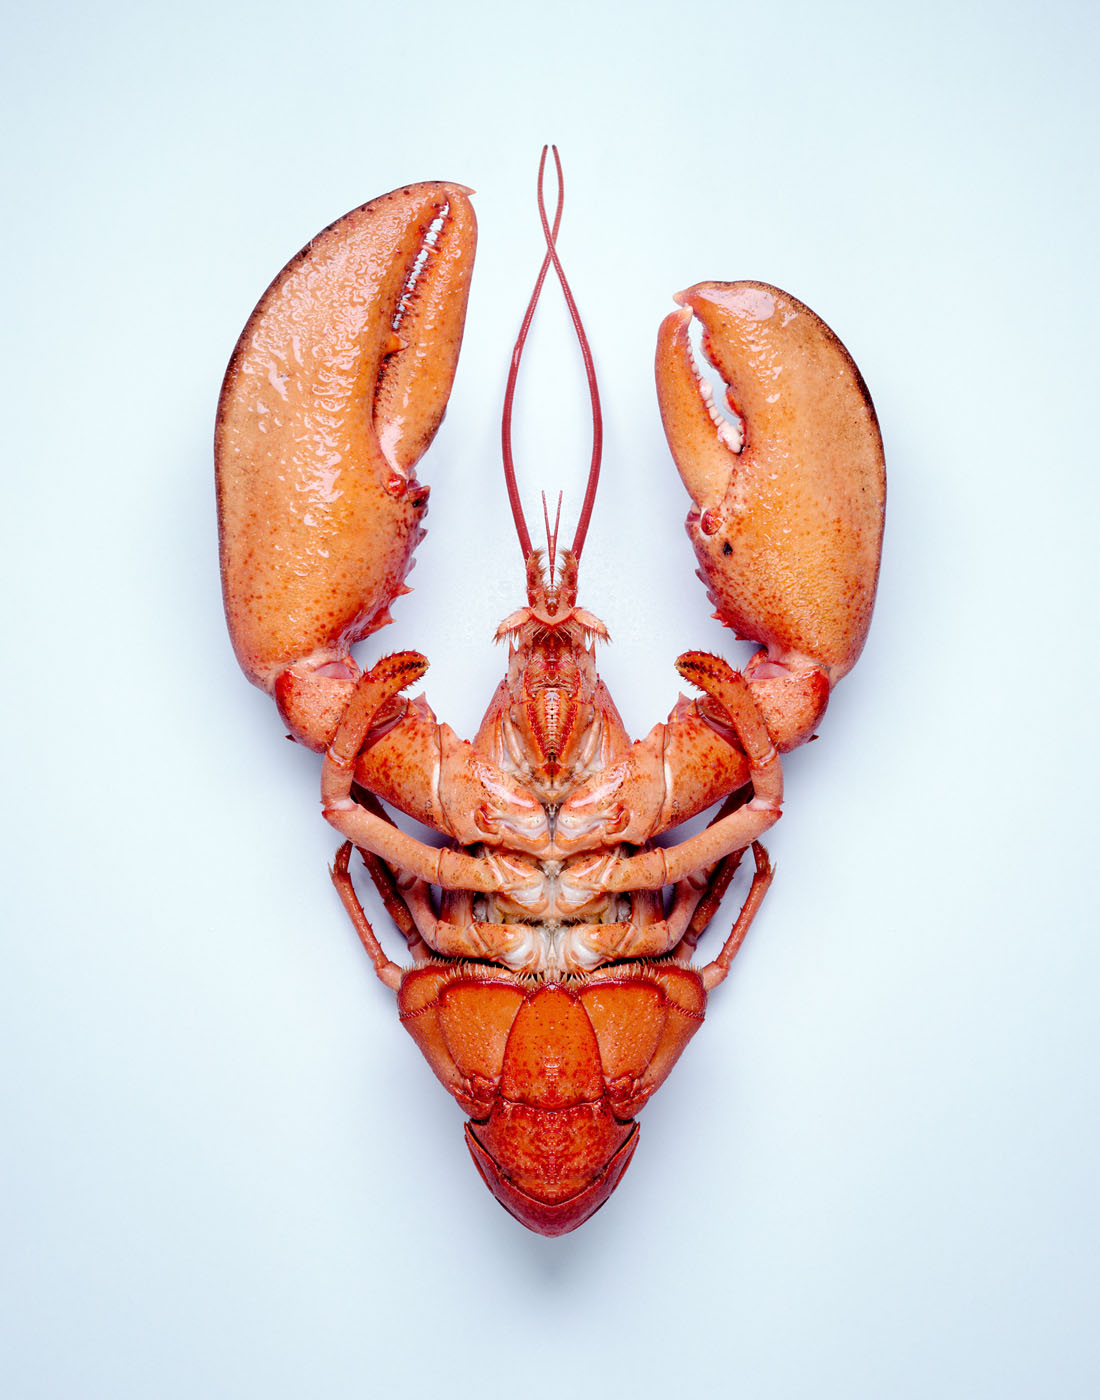 Lobster on blue background by Alexander Kent London based still life and product photographer.